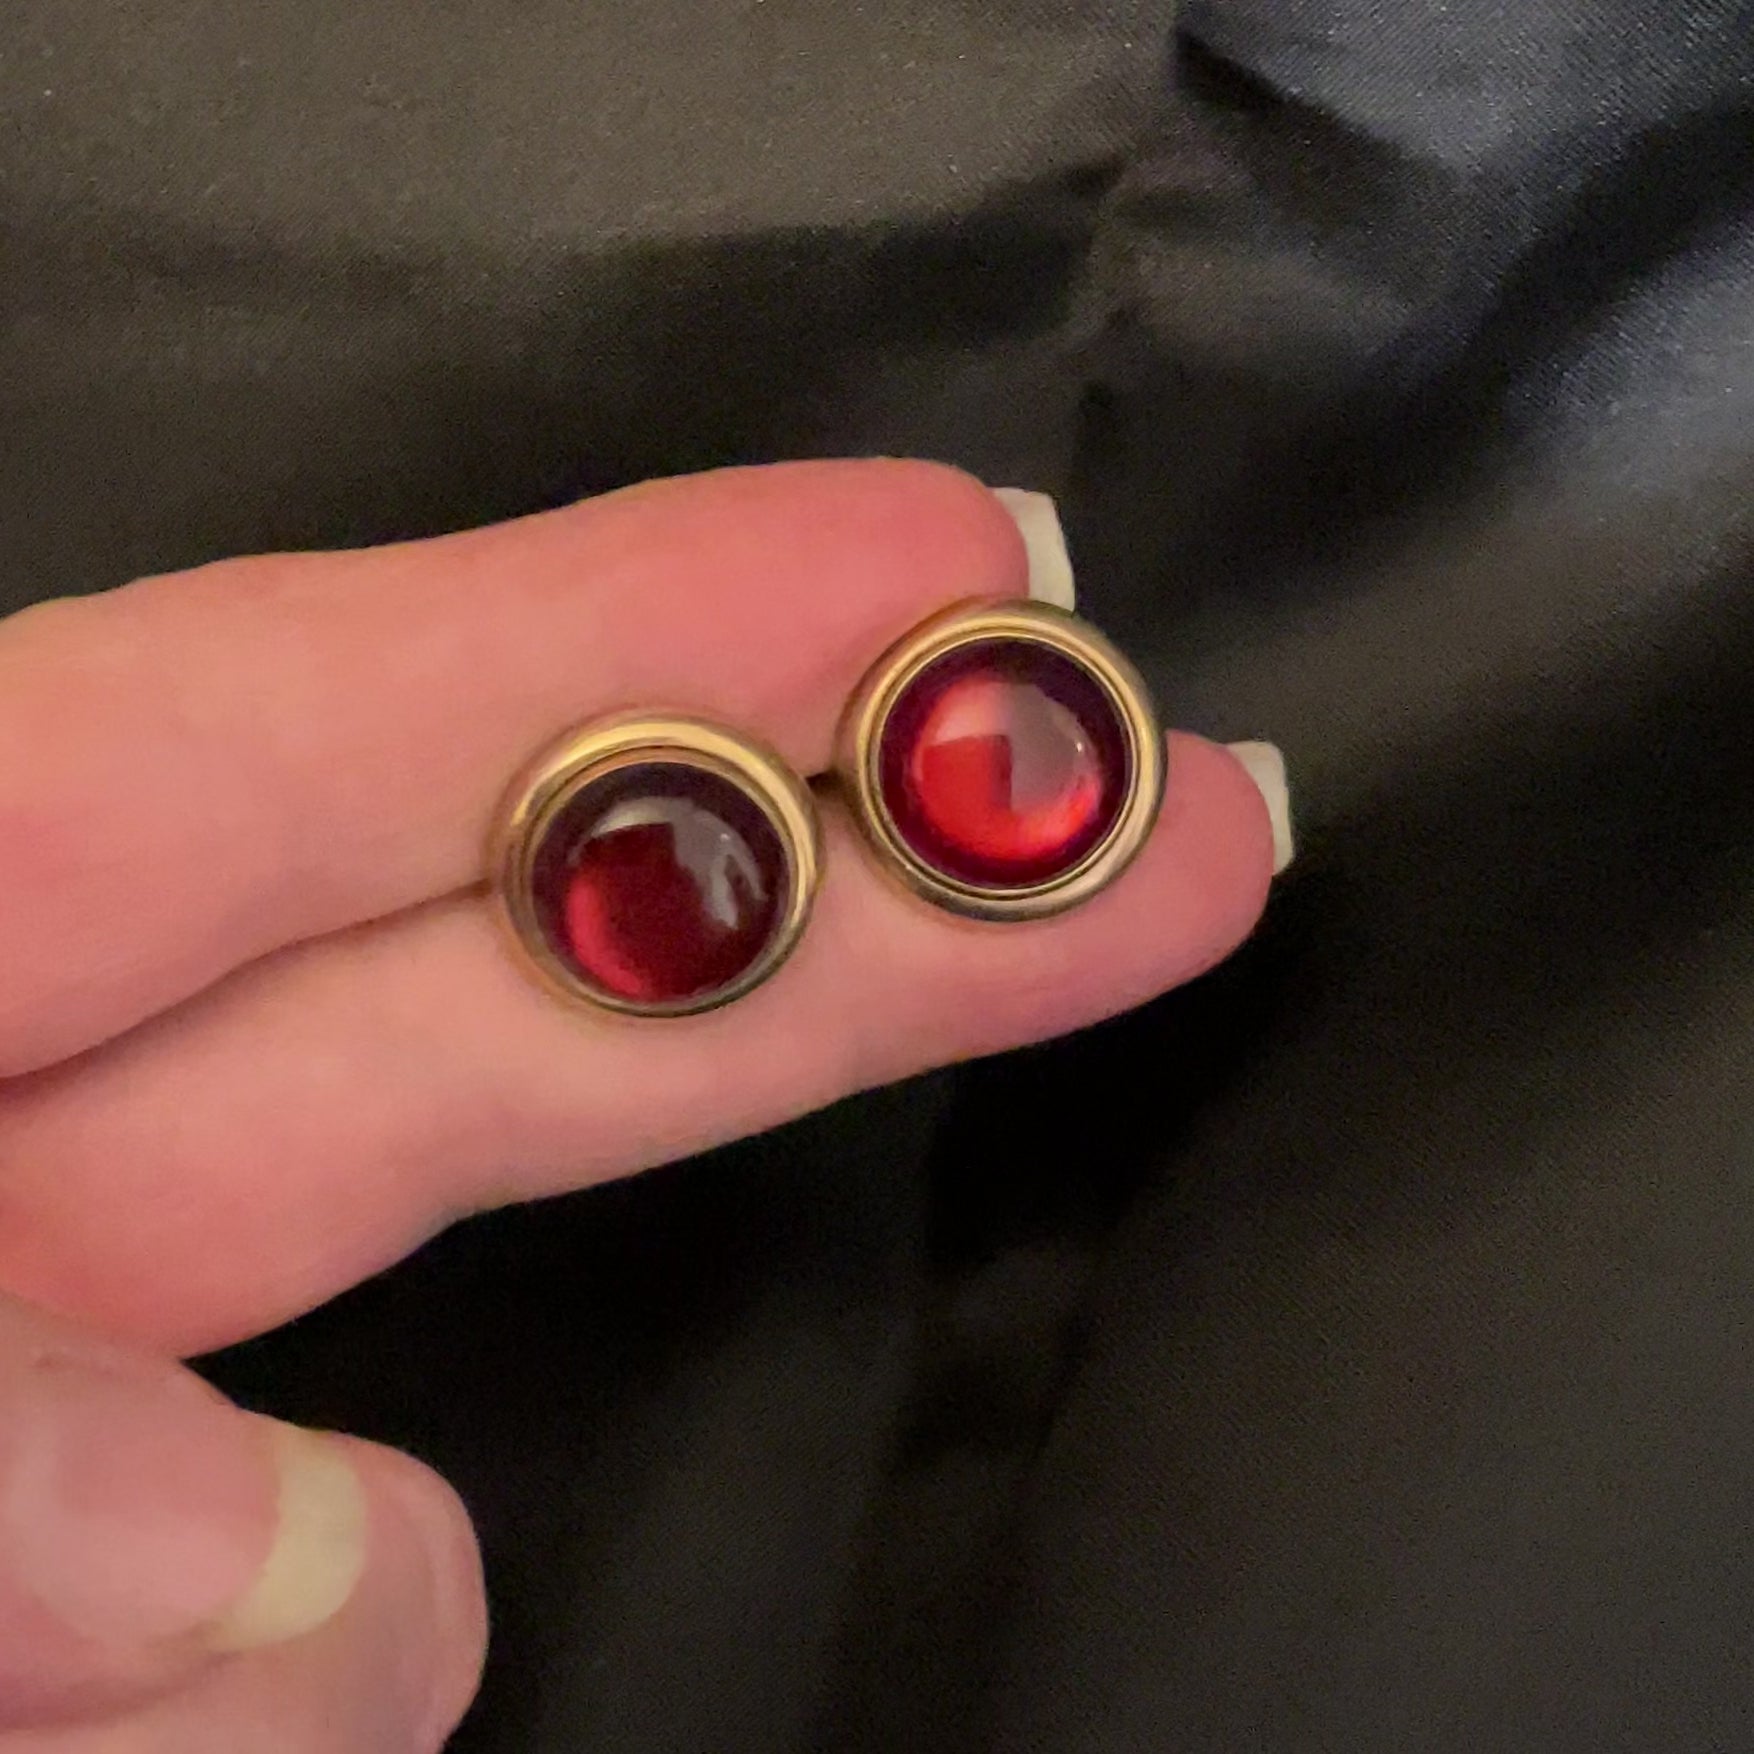 Video of the Mid Century Vintage Swank moonglow lucite cufflinks showing how the maroon red cabs have a glow like effect in the light.